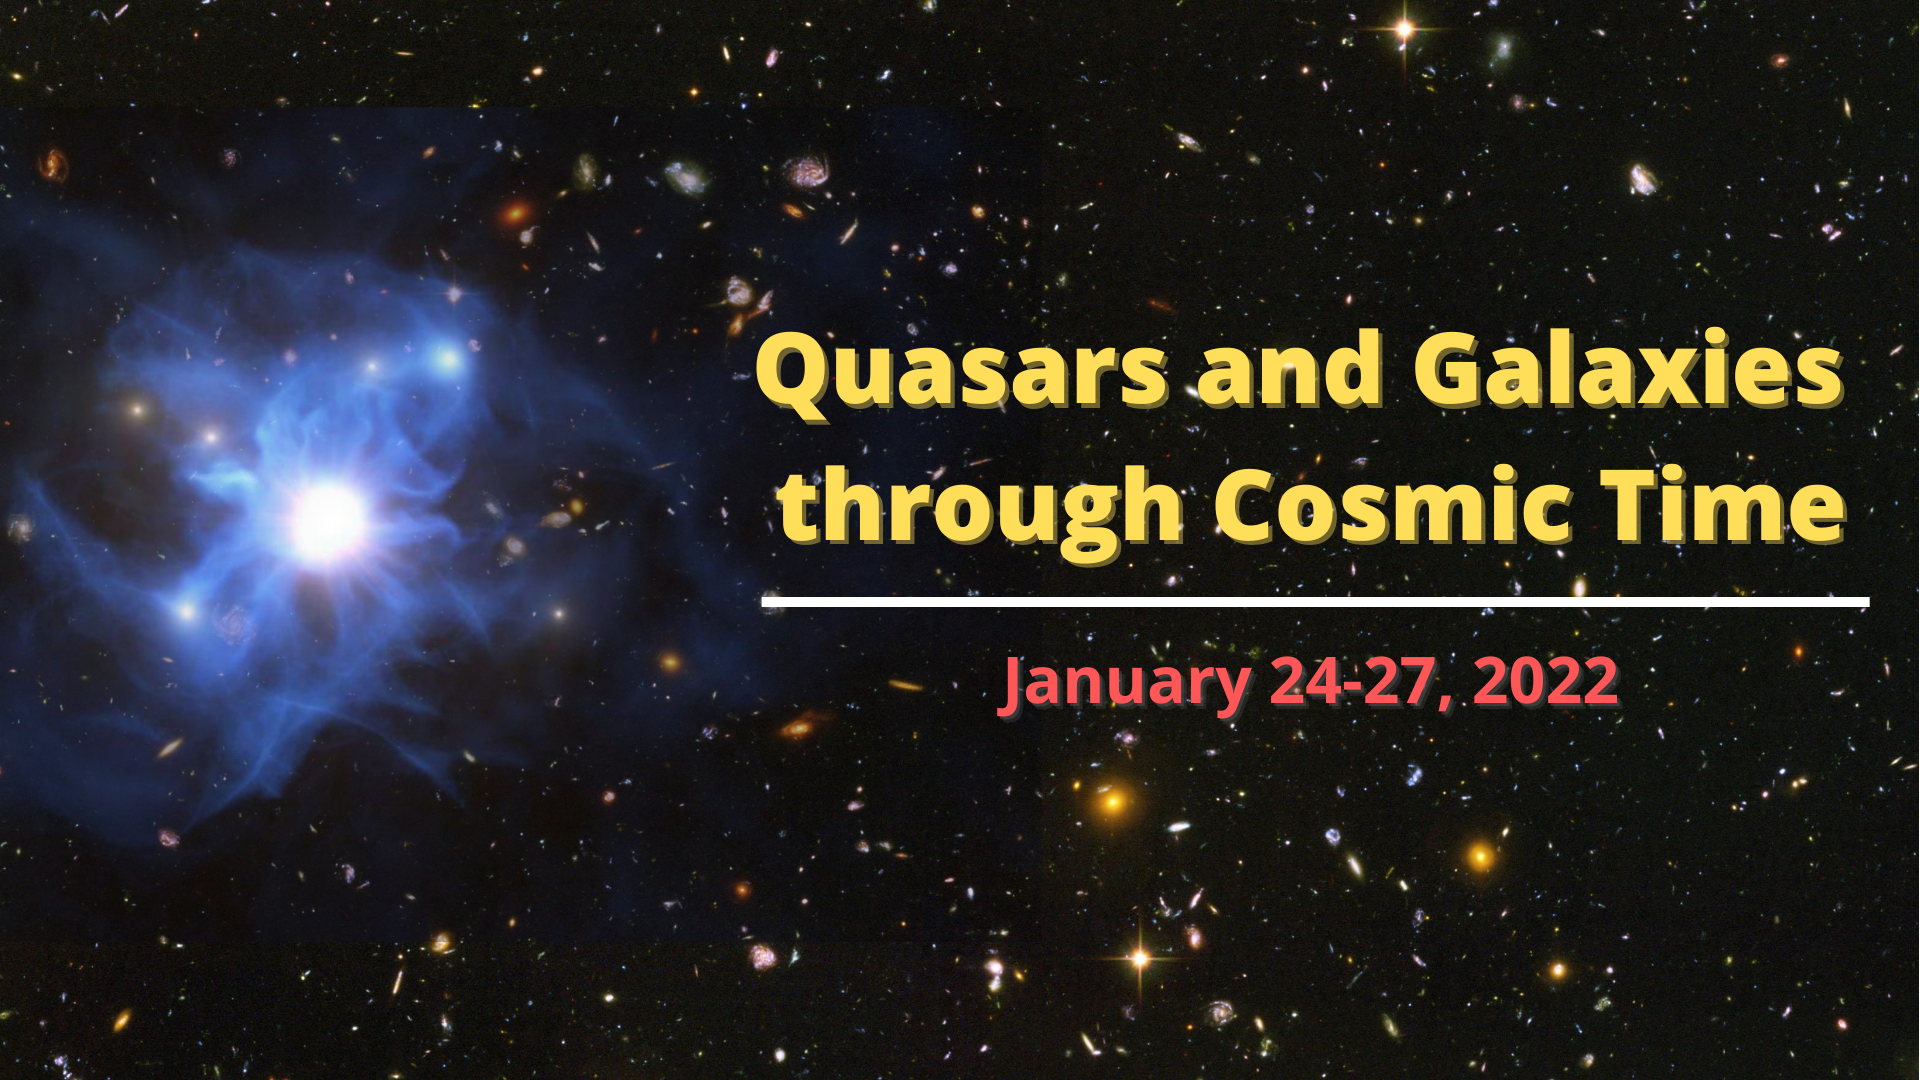 Quasars and Galaxies through Cosmic Time Conference